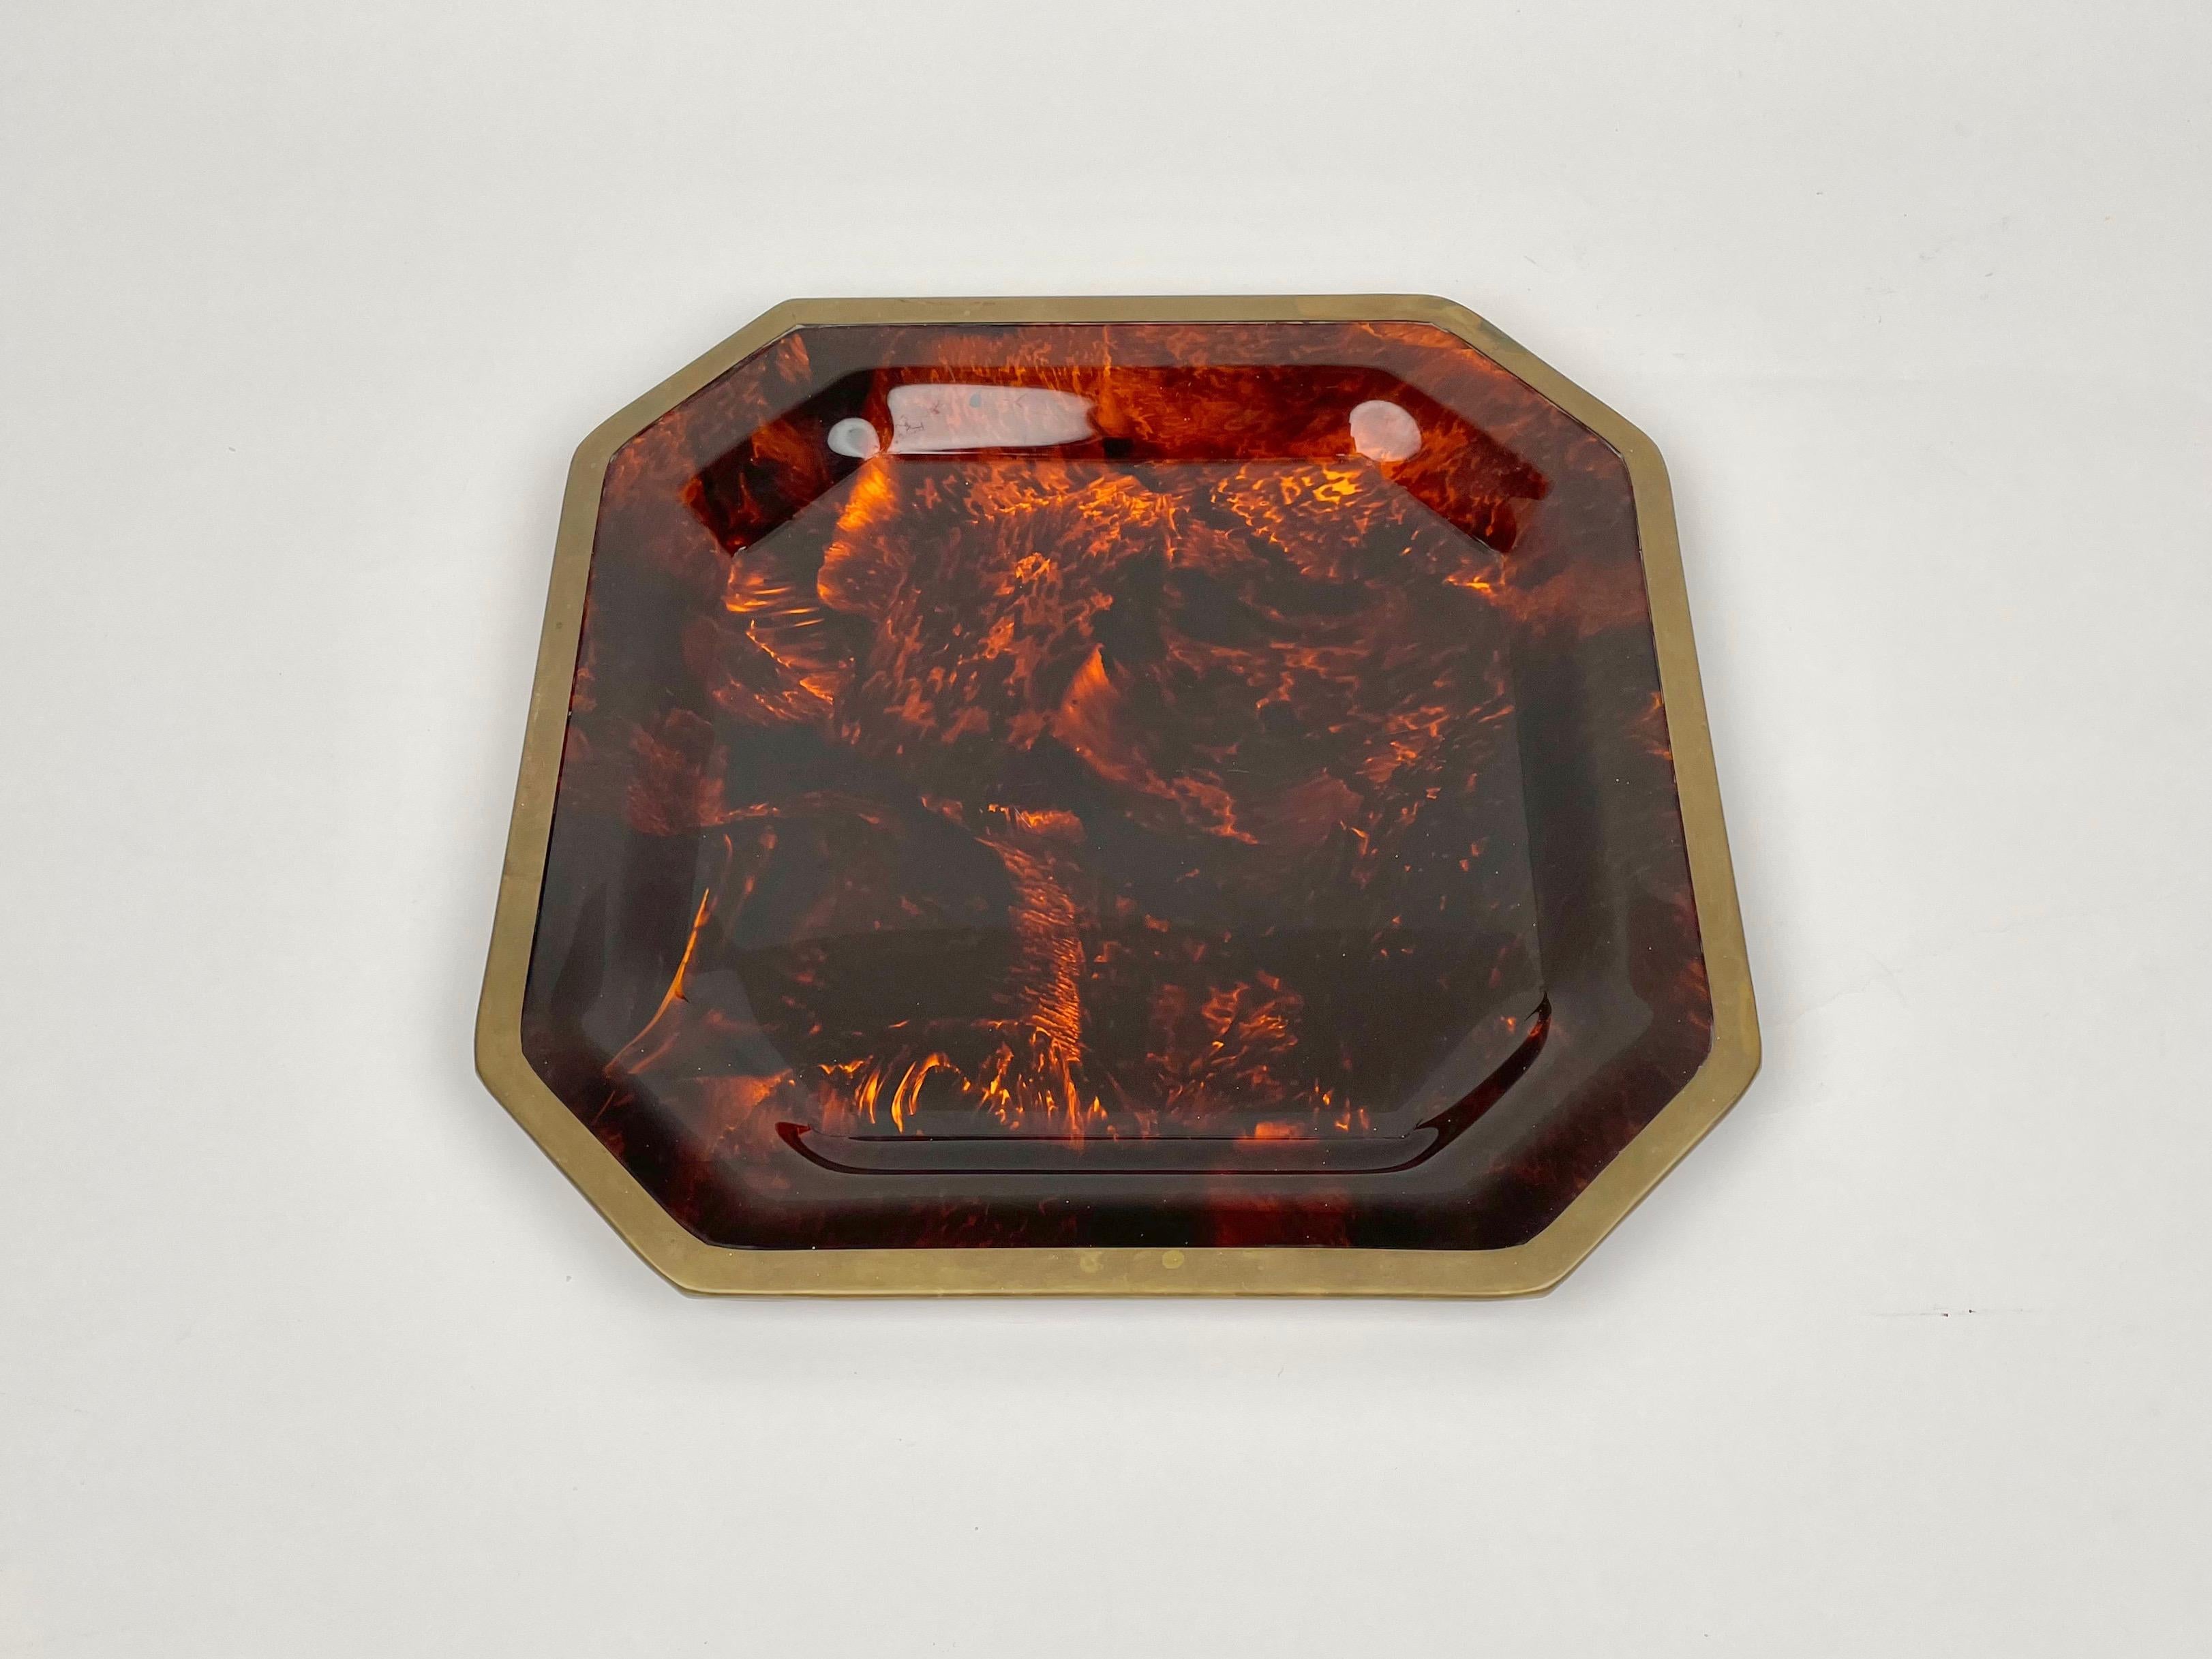 Octagonal centerpiece tray in tortoise shell-effect lucite and brass borders in the style of Christian Dior. Made in Italy in the 1970s.